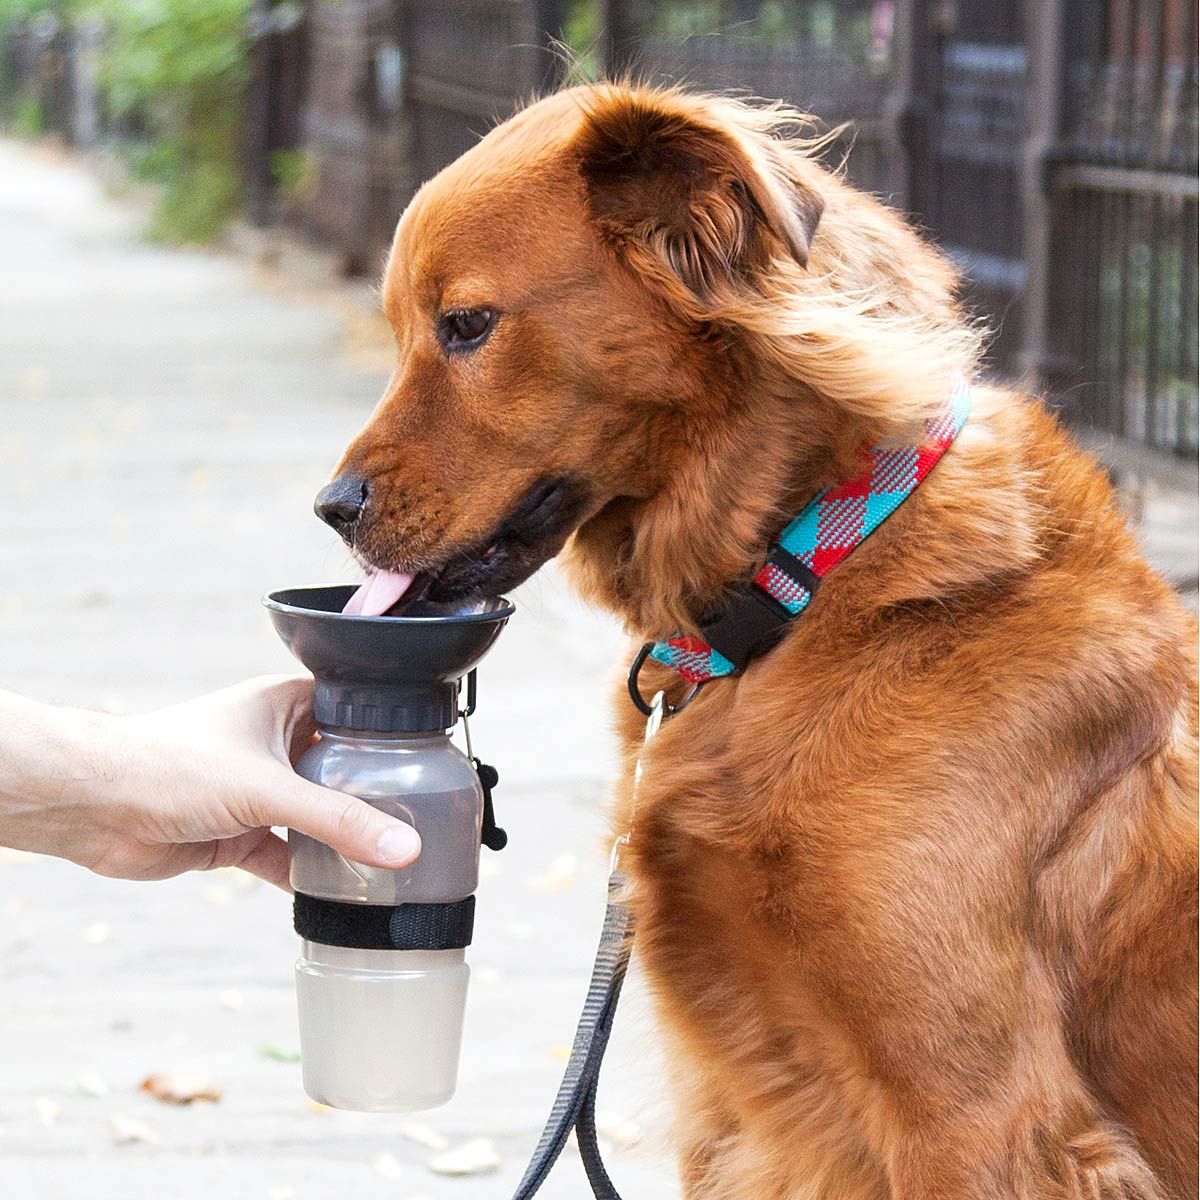 Dog bowl water bottle 10 Unique Luxury Gifts for Dogs That Amaze Everyone - 20